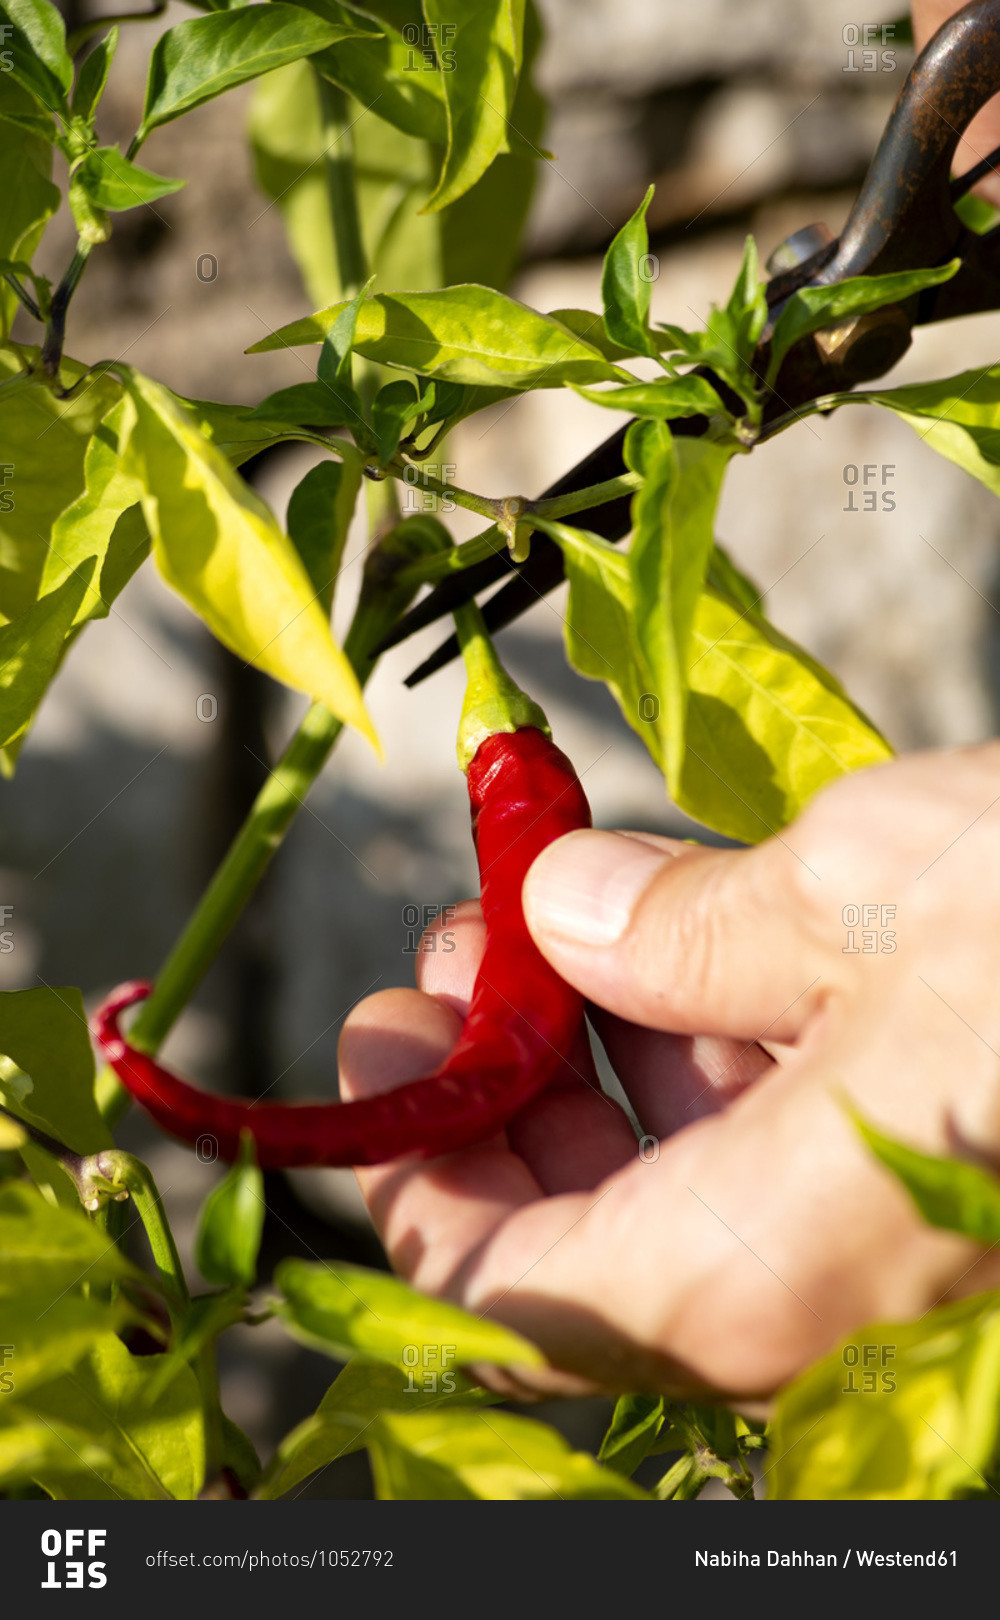 Hand of farm worker harvesting fresh red chili pepper while cutting stem